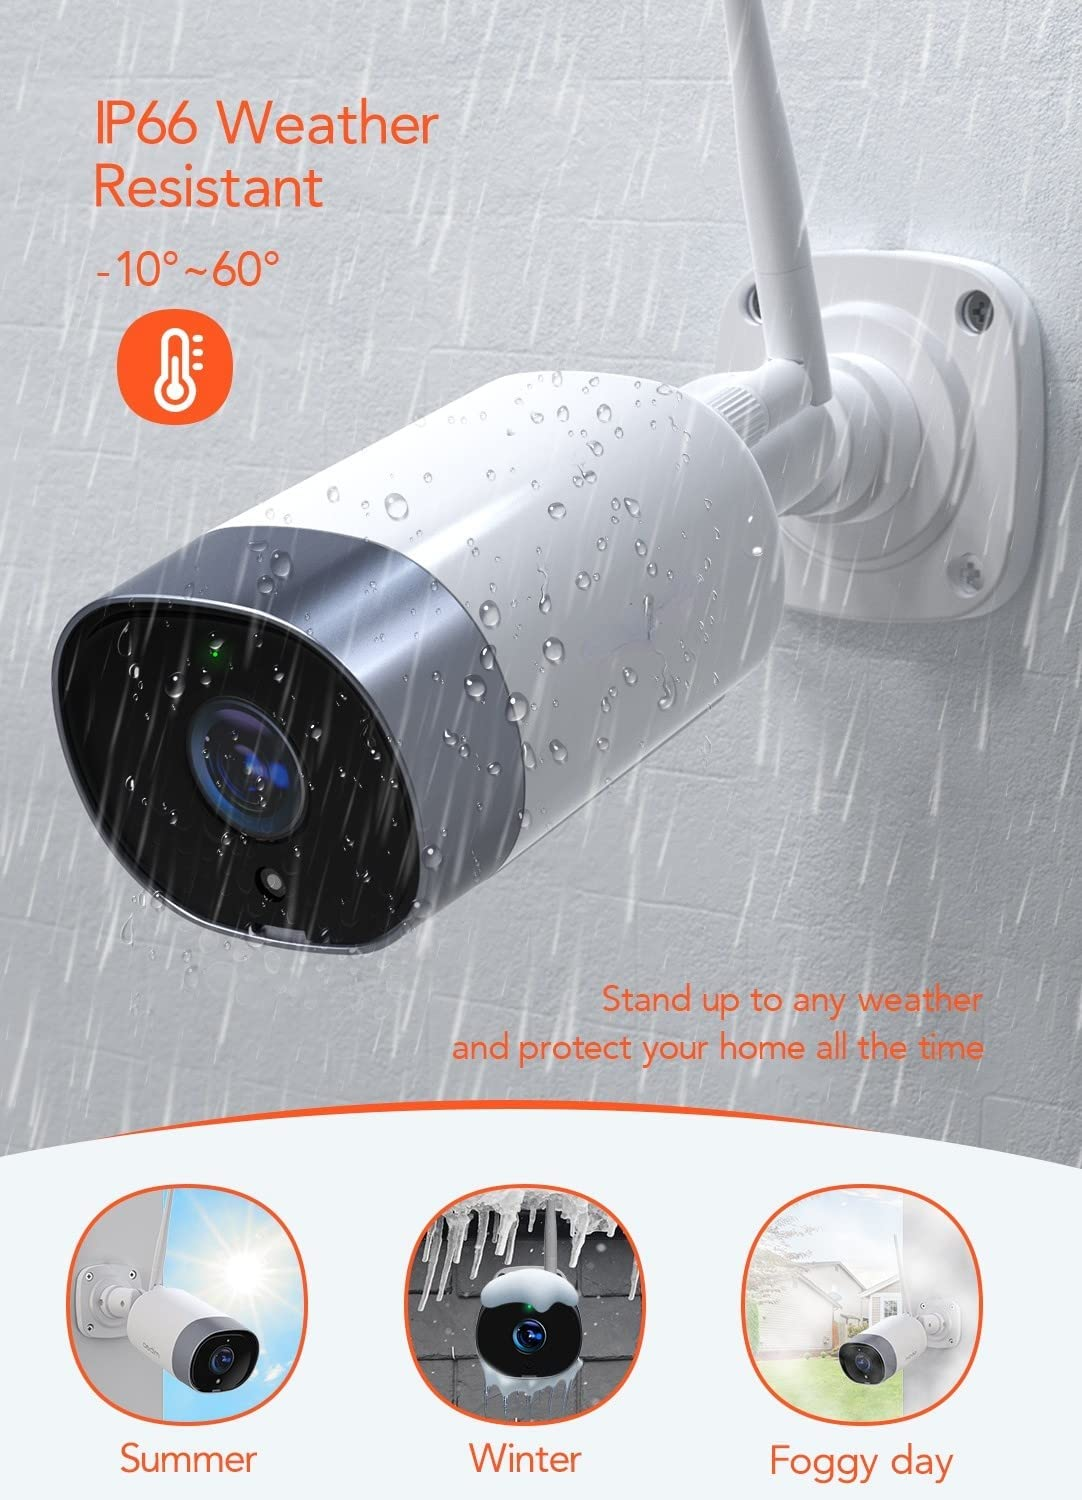 Security Camera Outdoor, 1080P Wifi Cameras for Home Security, IP66 Waterproof, with Two-Way Audio, Night Vision, Motion Detection, Compatible with Ios/Android